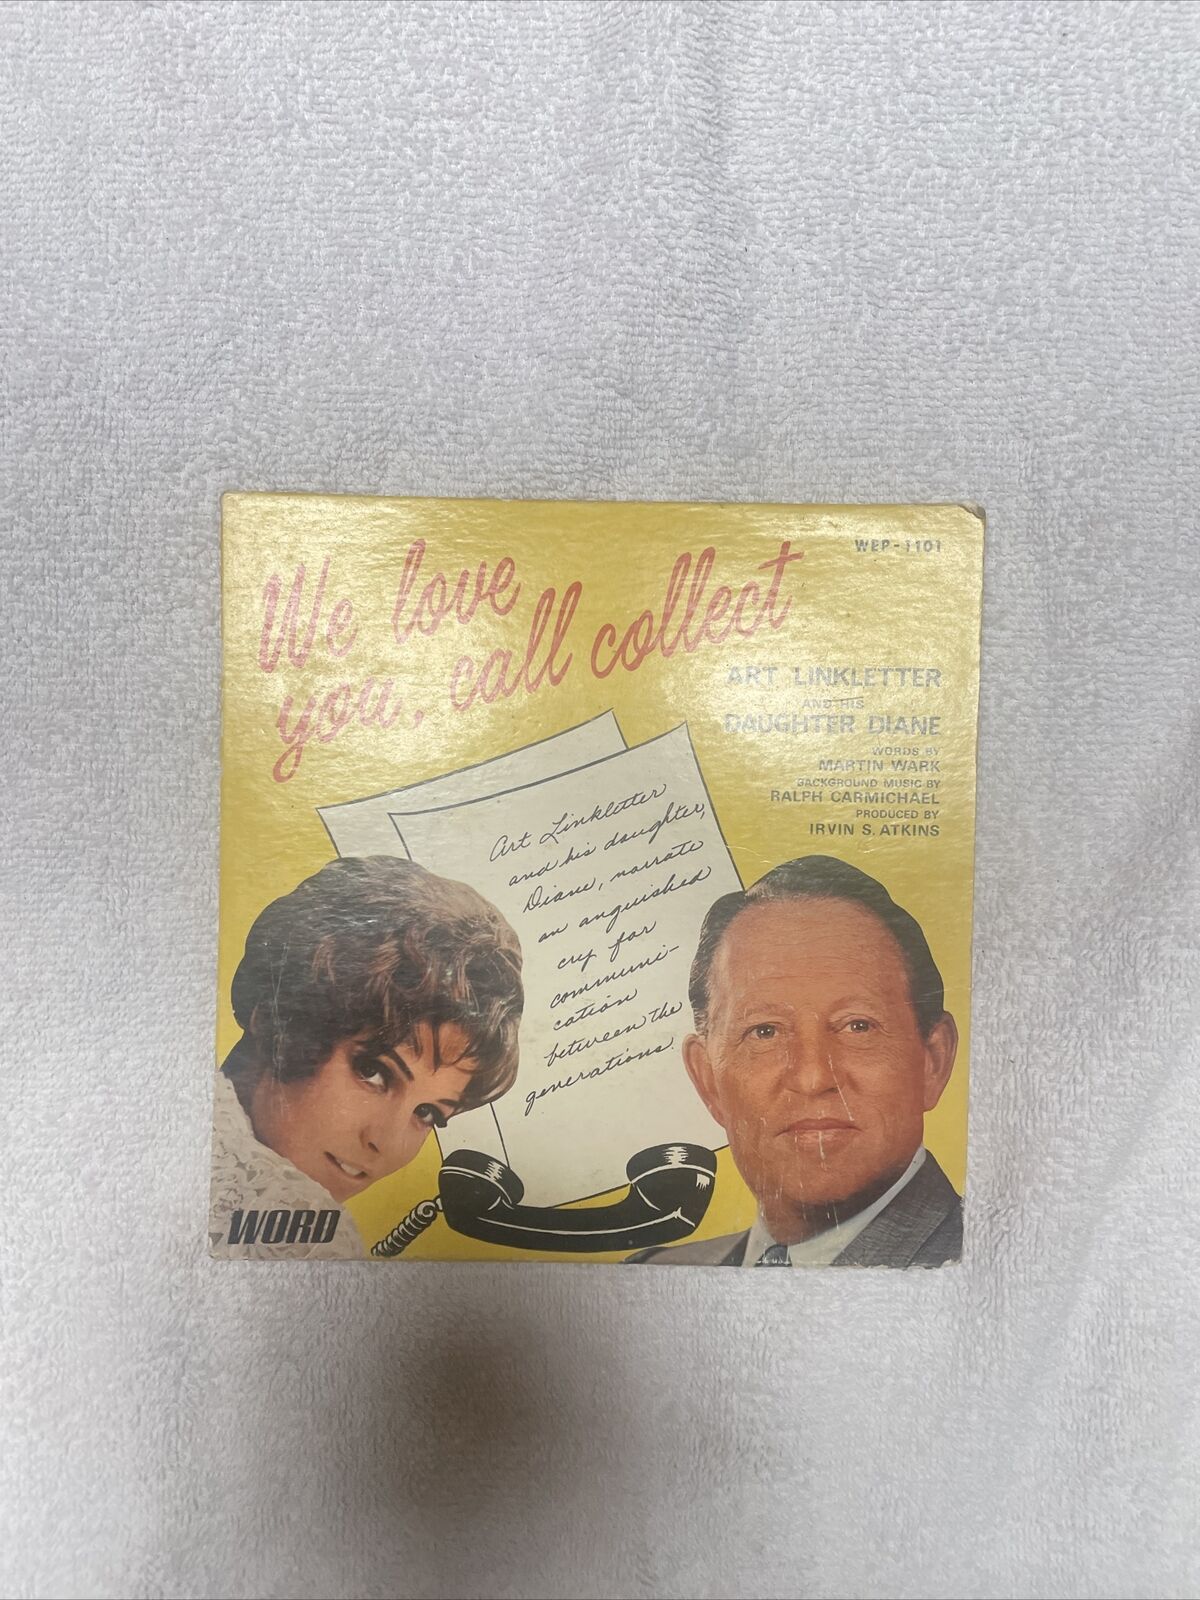 Art Linkletter And His Daughter Diane Linkletter - We Love You, Call Collect 196